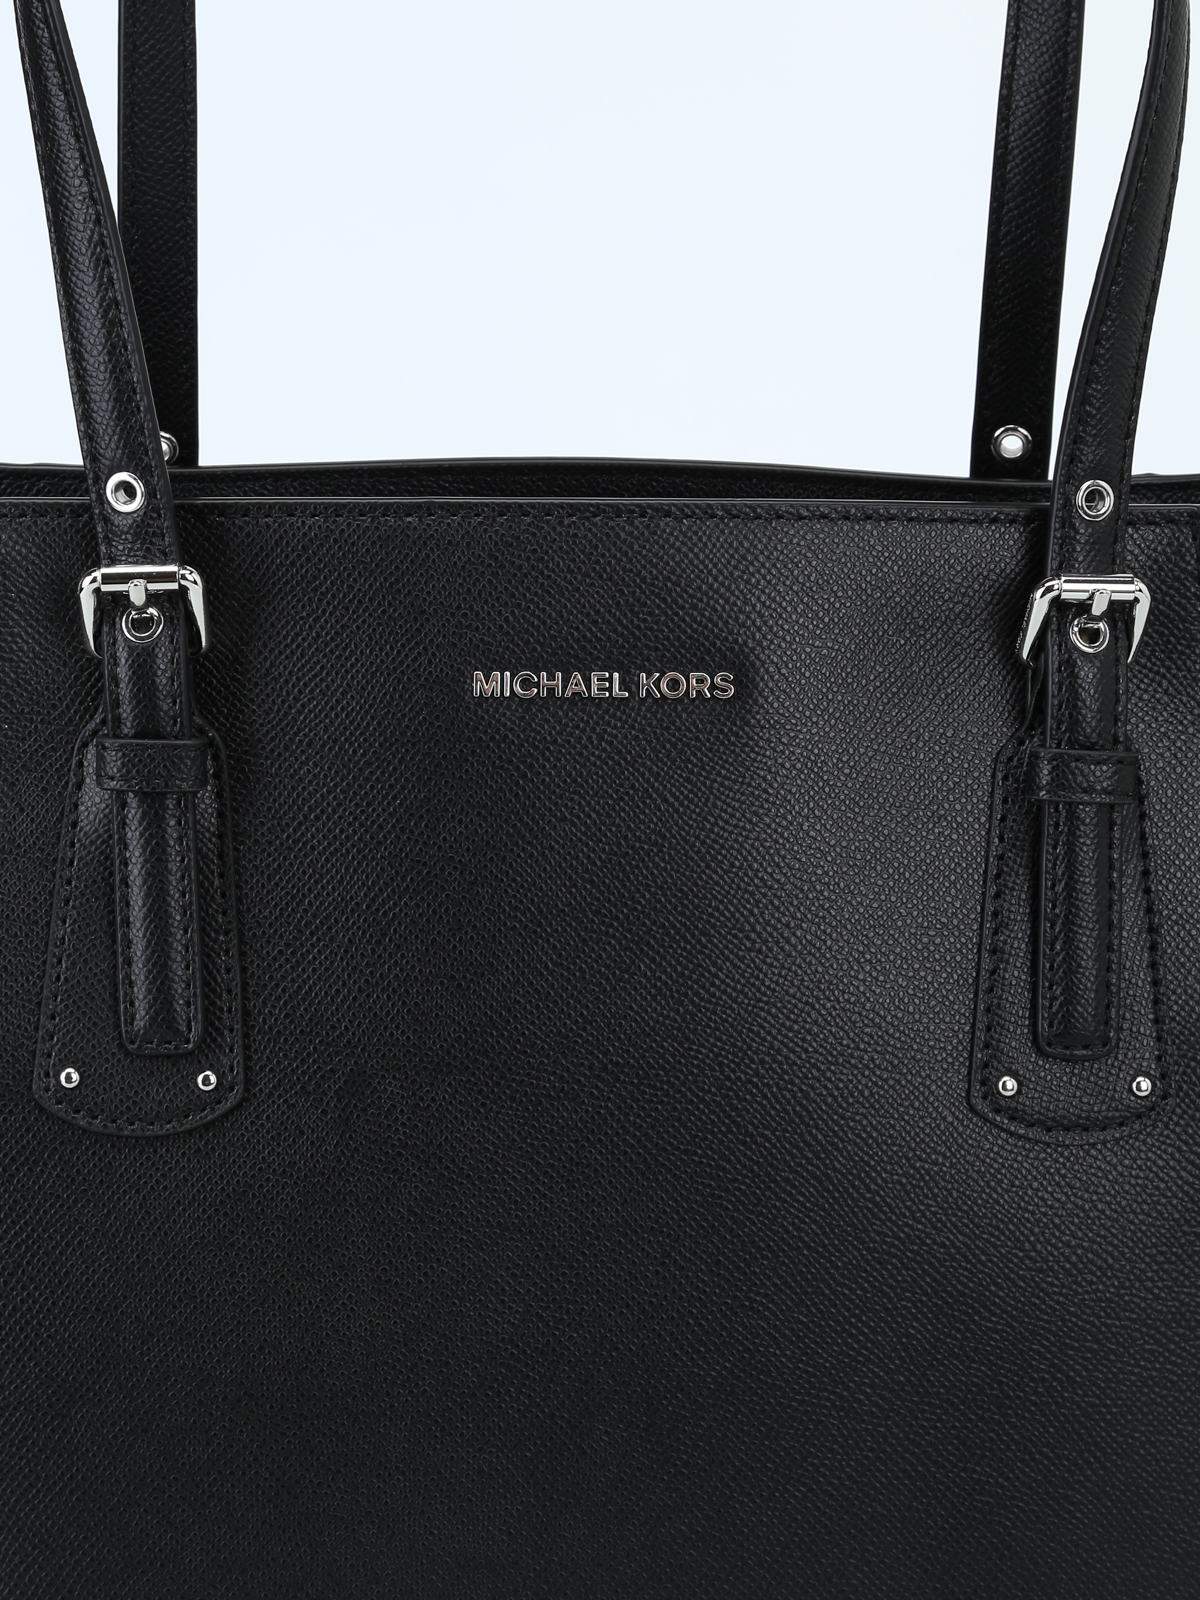 Totes bags Michael Kors - Voyager black leather tote - 30F8SV6T4L001